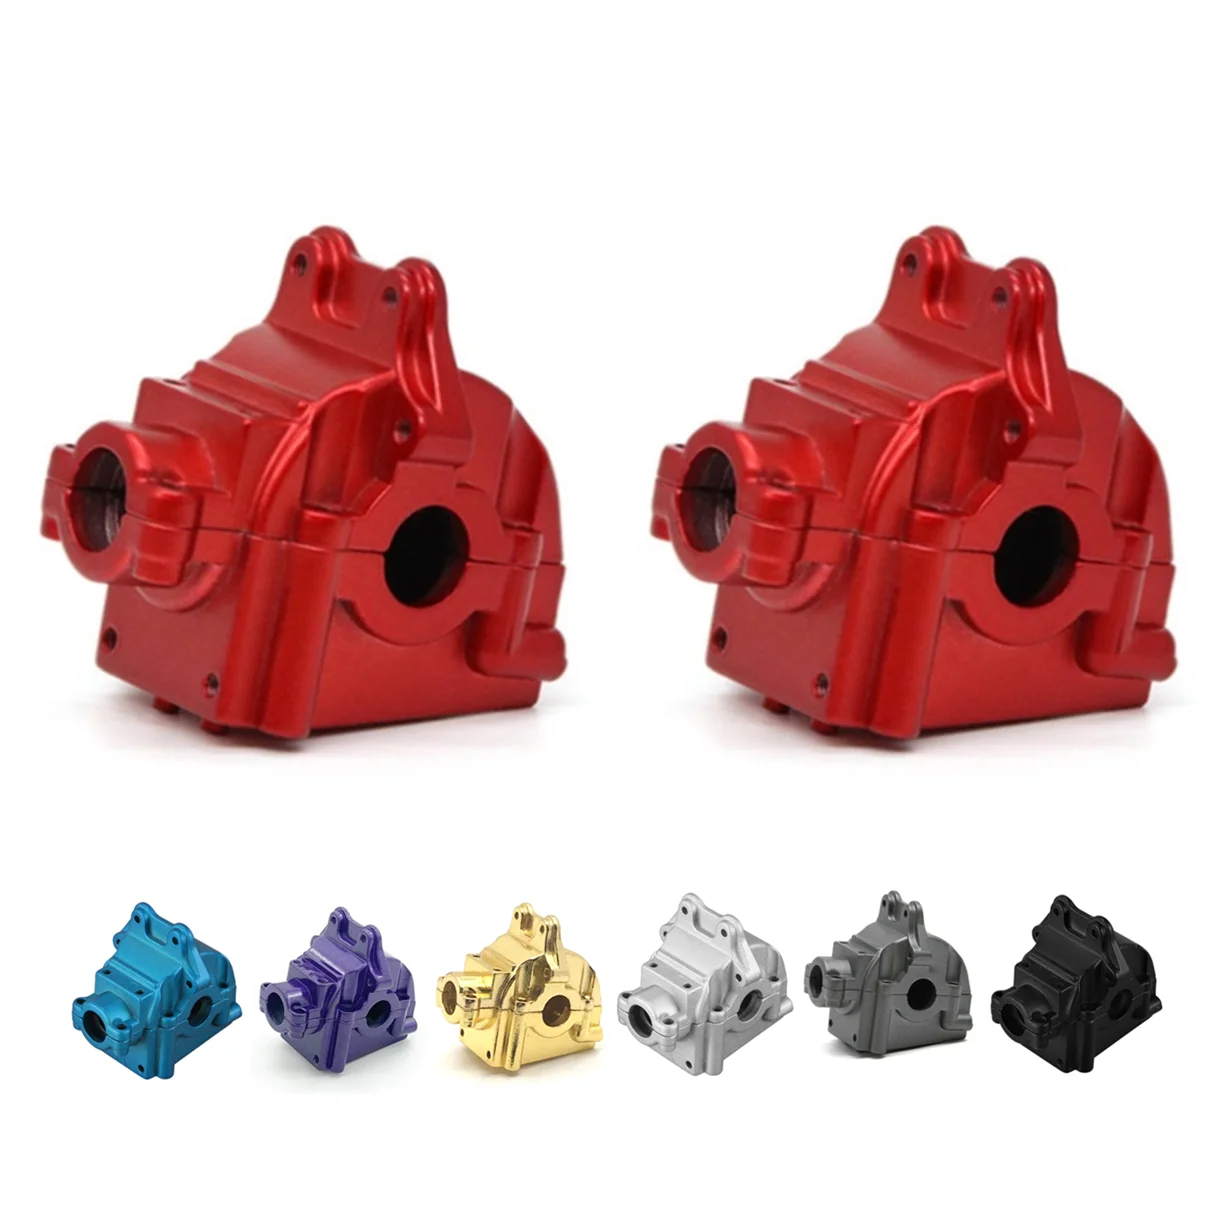 Wltoys 144001 Metal Gear Box Shell Differential Housing GearBox for Wltoys - $10.47 - $13.81